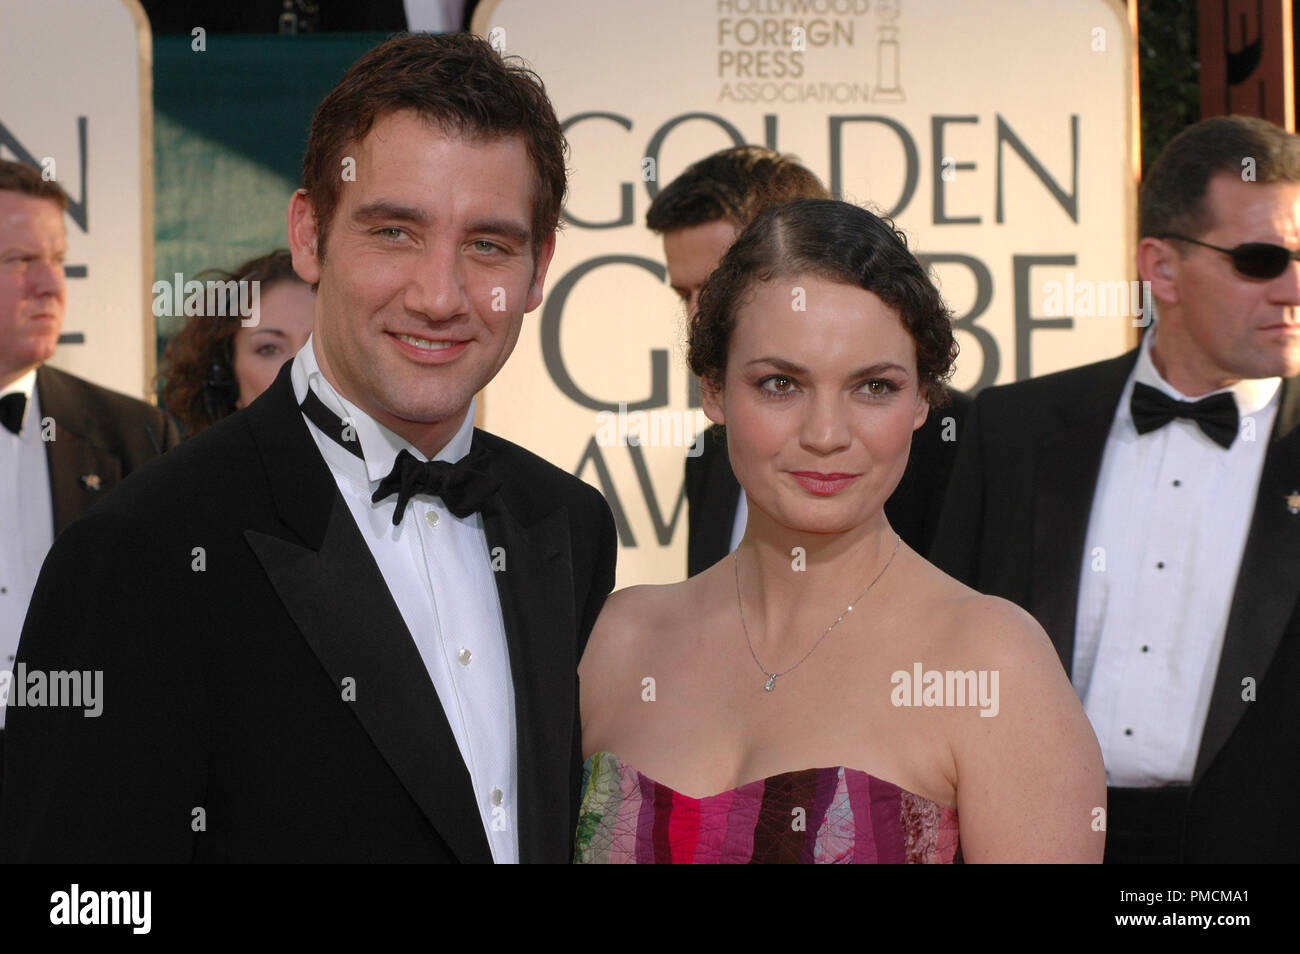 Arrivals at the  'Golden Globe Awards - 62nd Annual' Clive Owen with wife Sarah-Jane Fenton 1-16-2005  File Reference # 1080 017PLX  For Editorial Use Only - Stock Photo